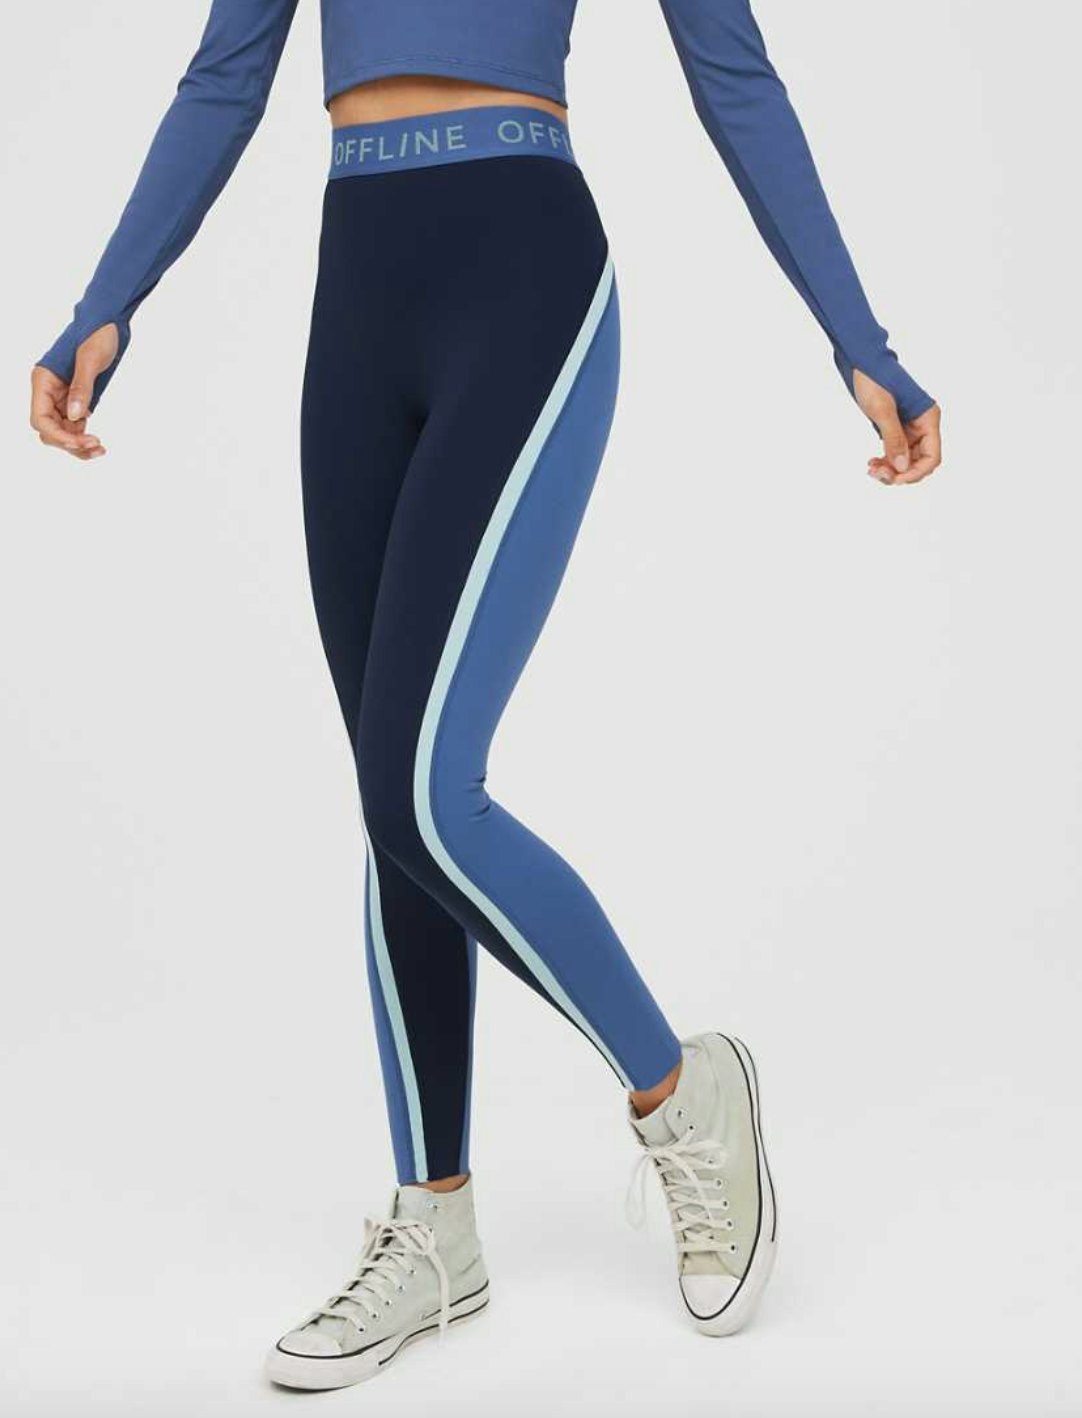 Aerie's Offline Leggings Will Seriously Give You A BBL In Seconds